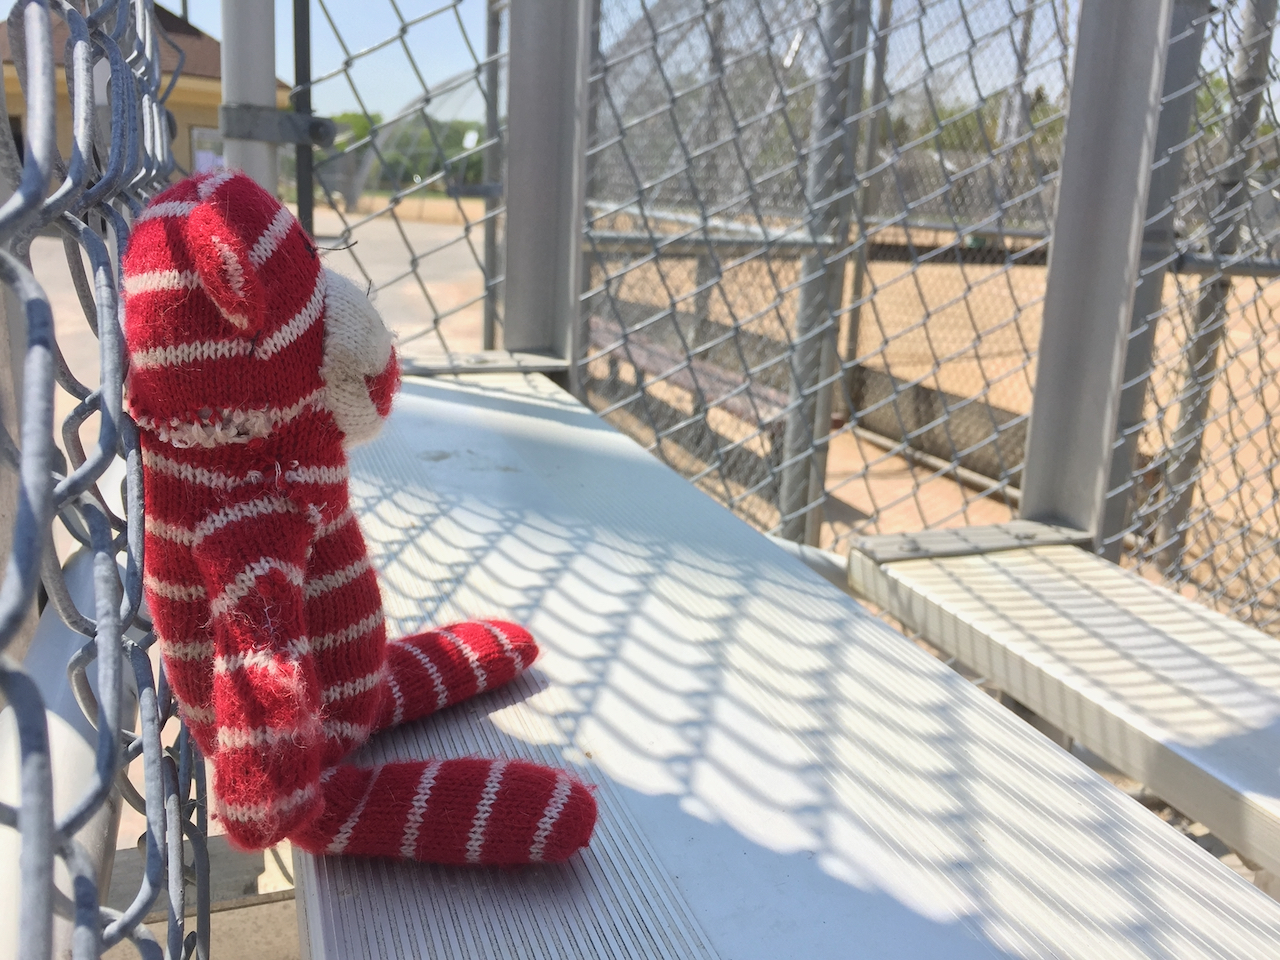 A little stuffed monkey sitting on a bench in the dugout of a ballfield.